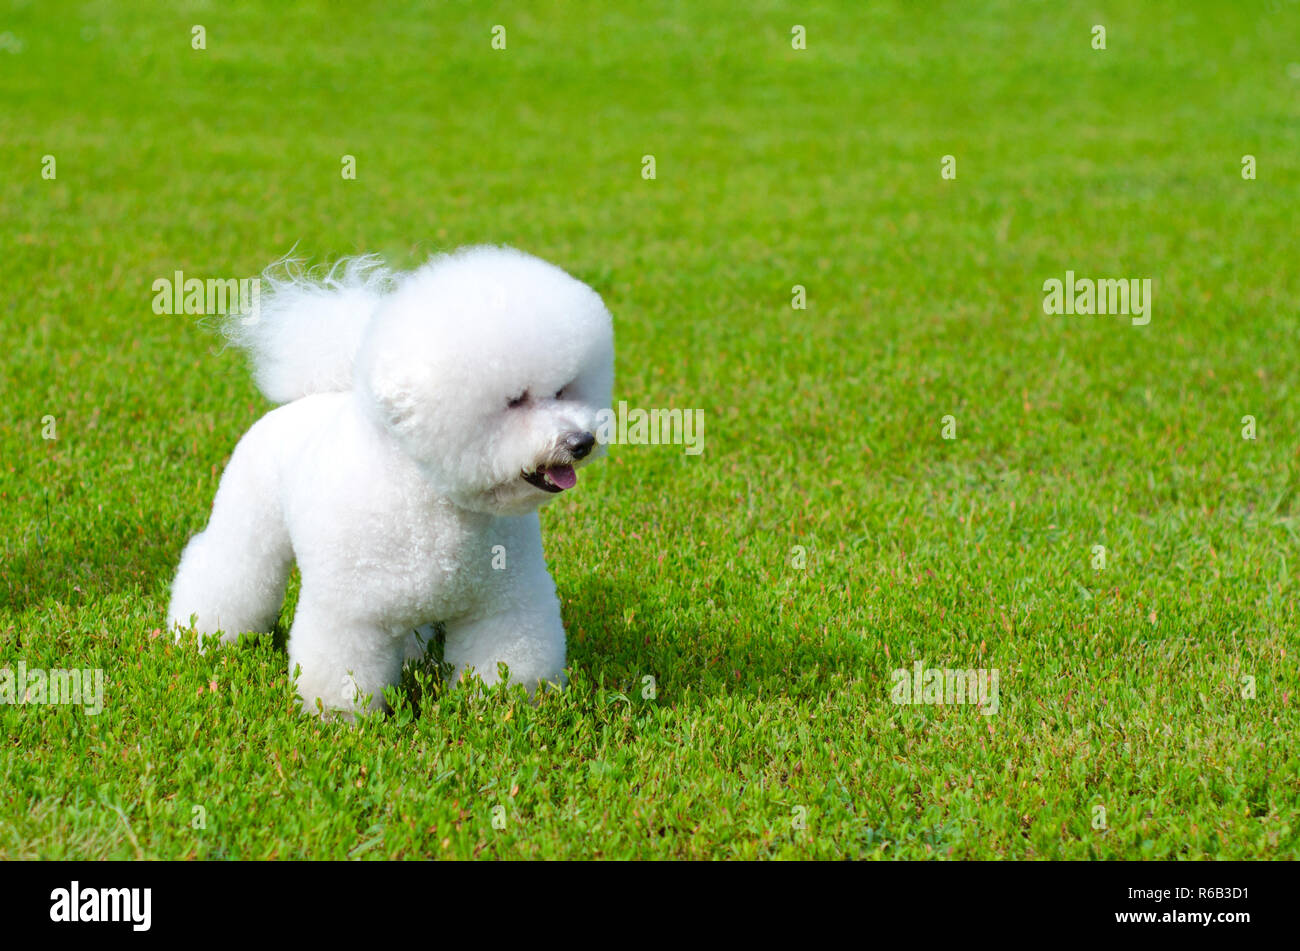 bichon frise on a green grass outdoors Stock Photo